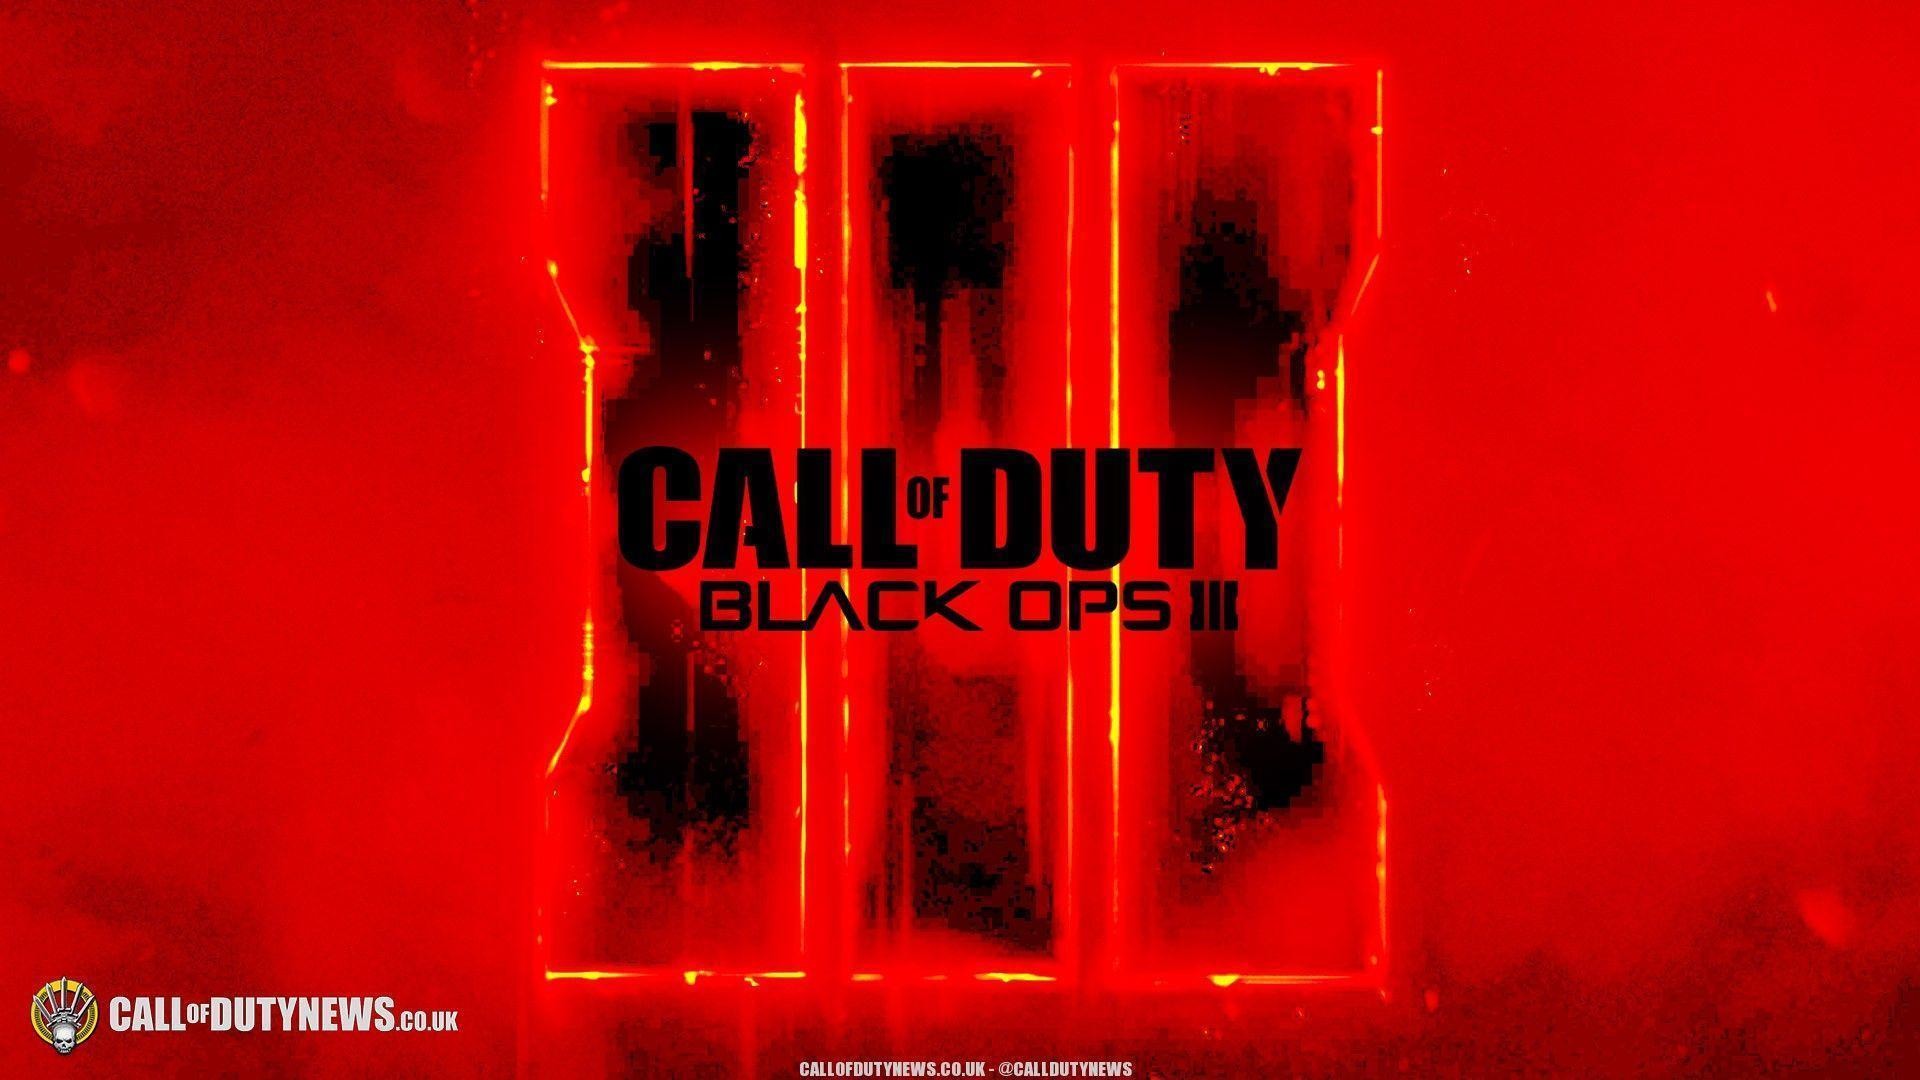 1920x1080 Black Ops 3 Wallpapers | Call of Duty Blog